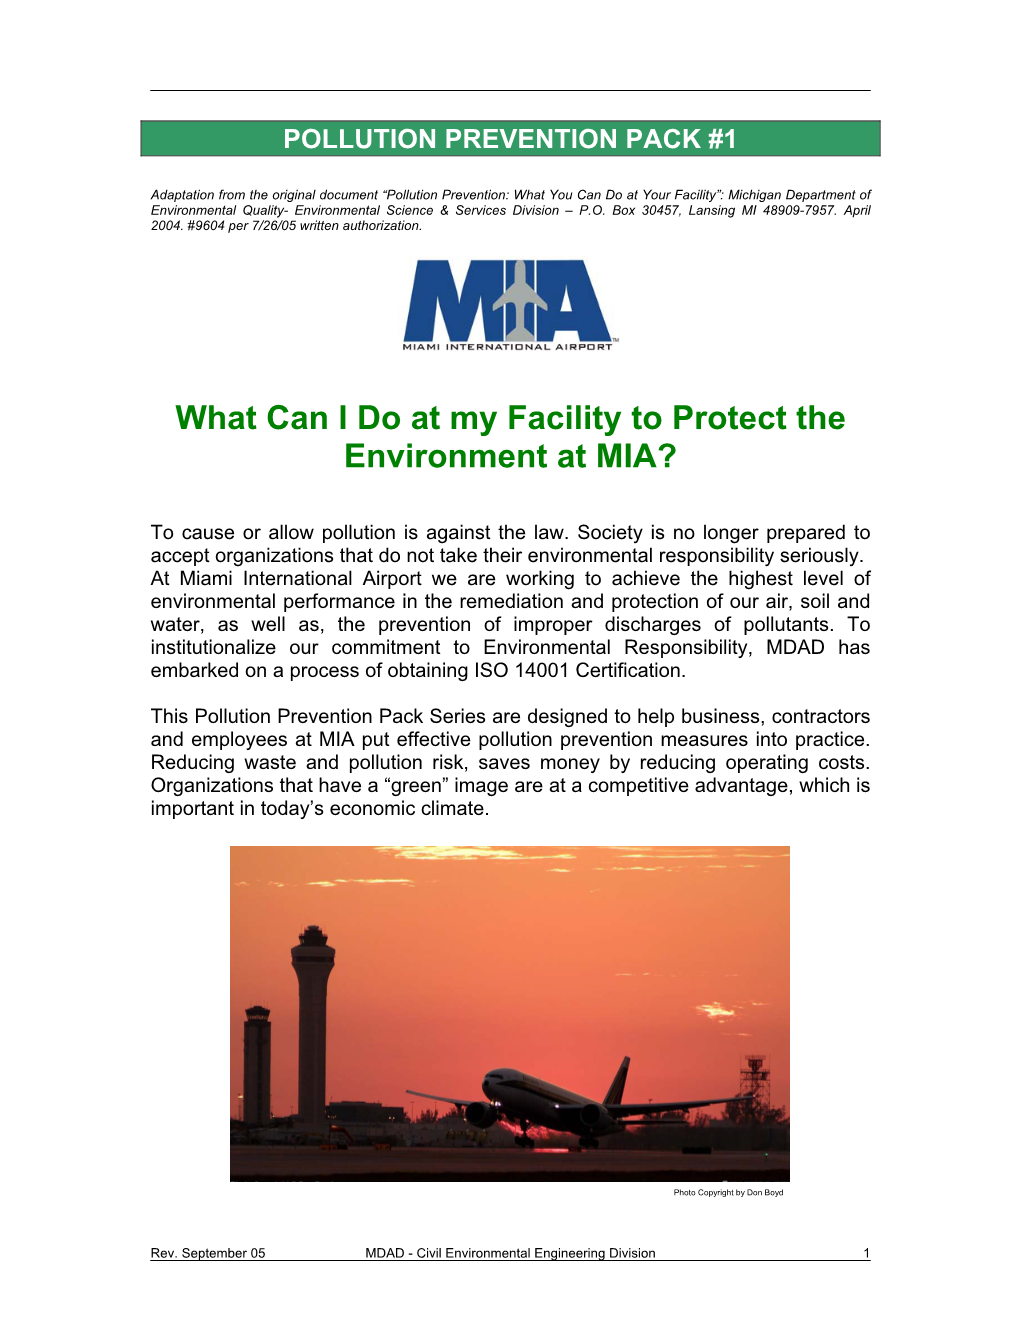 What Can I Do at My Facility to Protect the Environment at MIA?